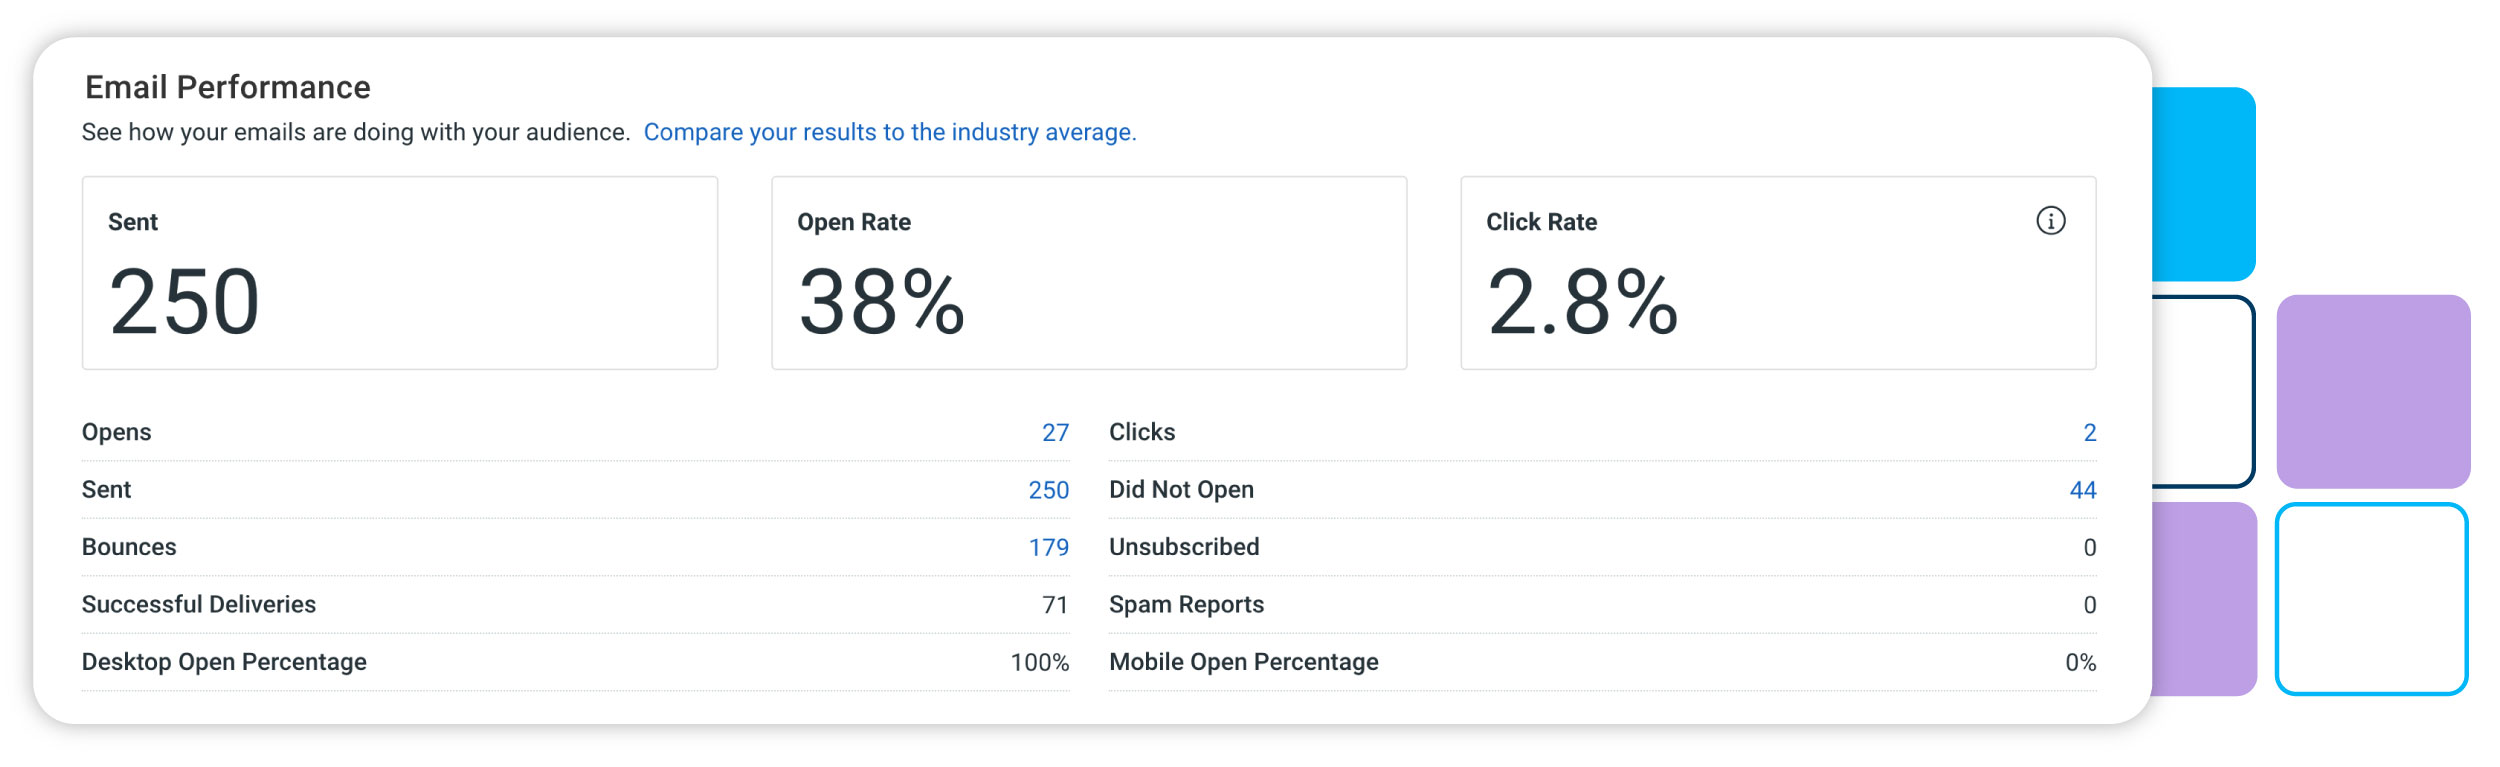 Example of analytics in Constant Contact, including data for sent emails, opened emails, click rate, etc.